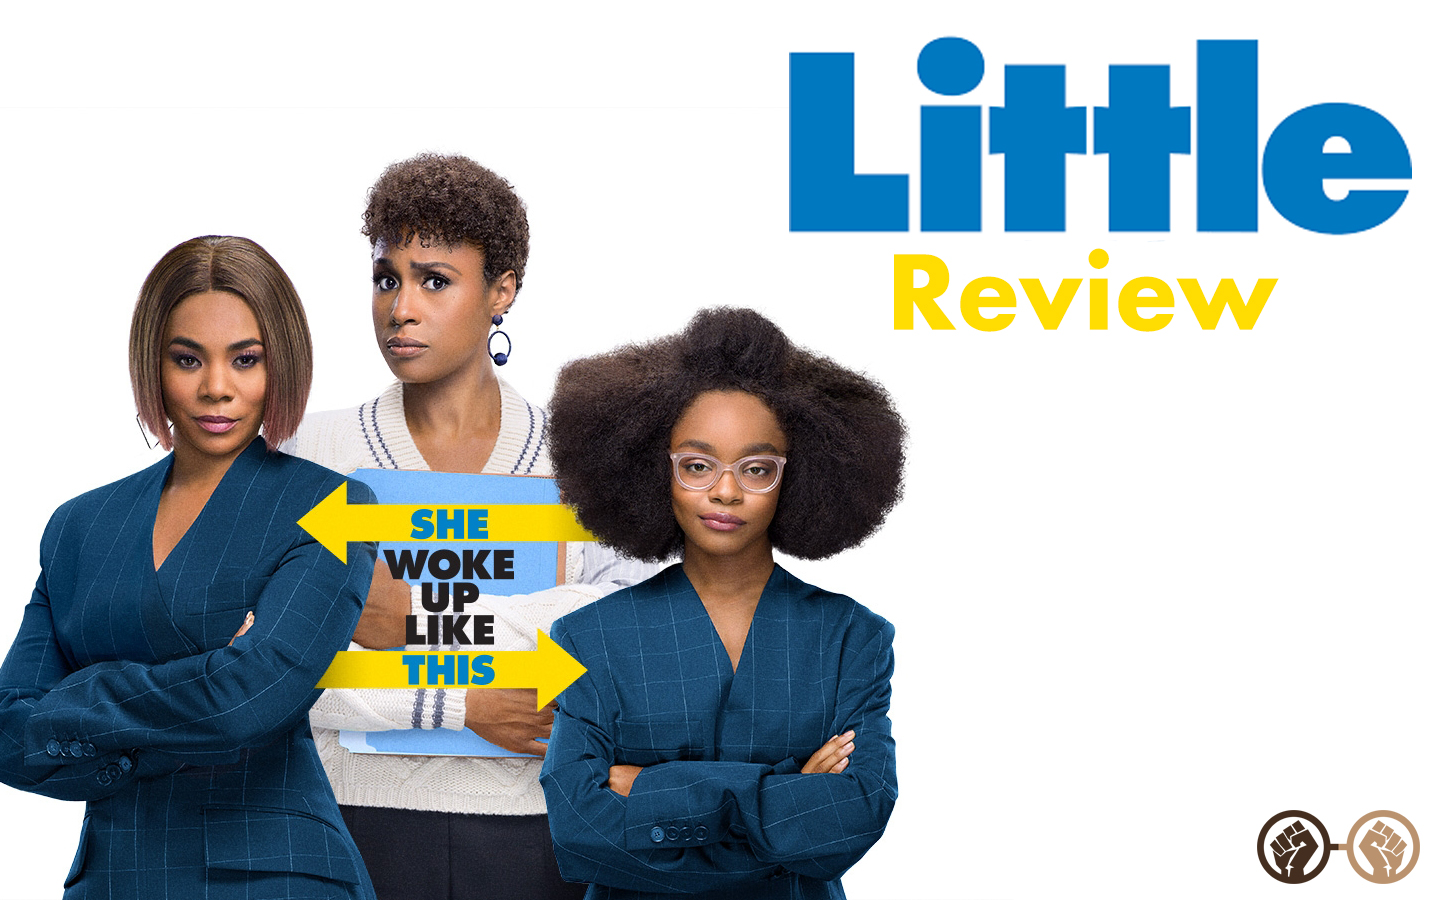 While Both Hilarious and Heartwarming, ‘Little’ Sheds an Important Light on the Toll of Bullying  – Review